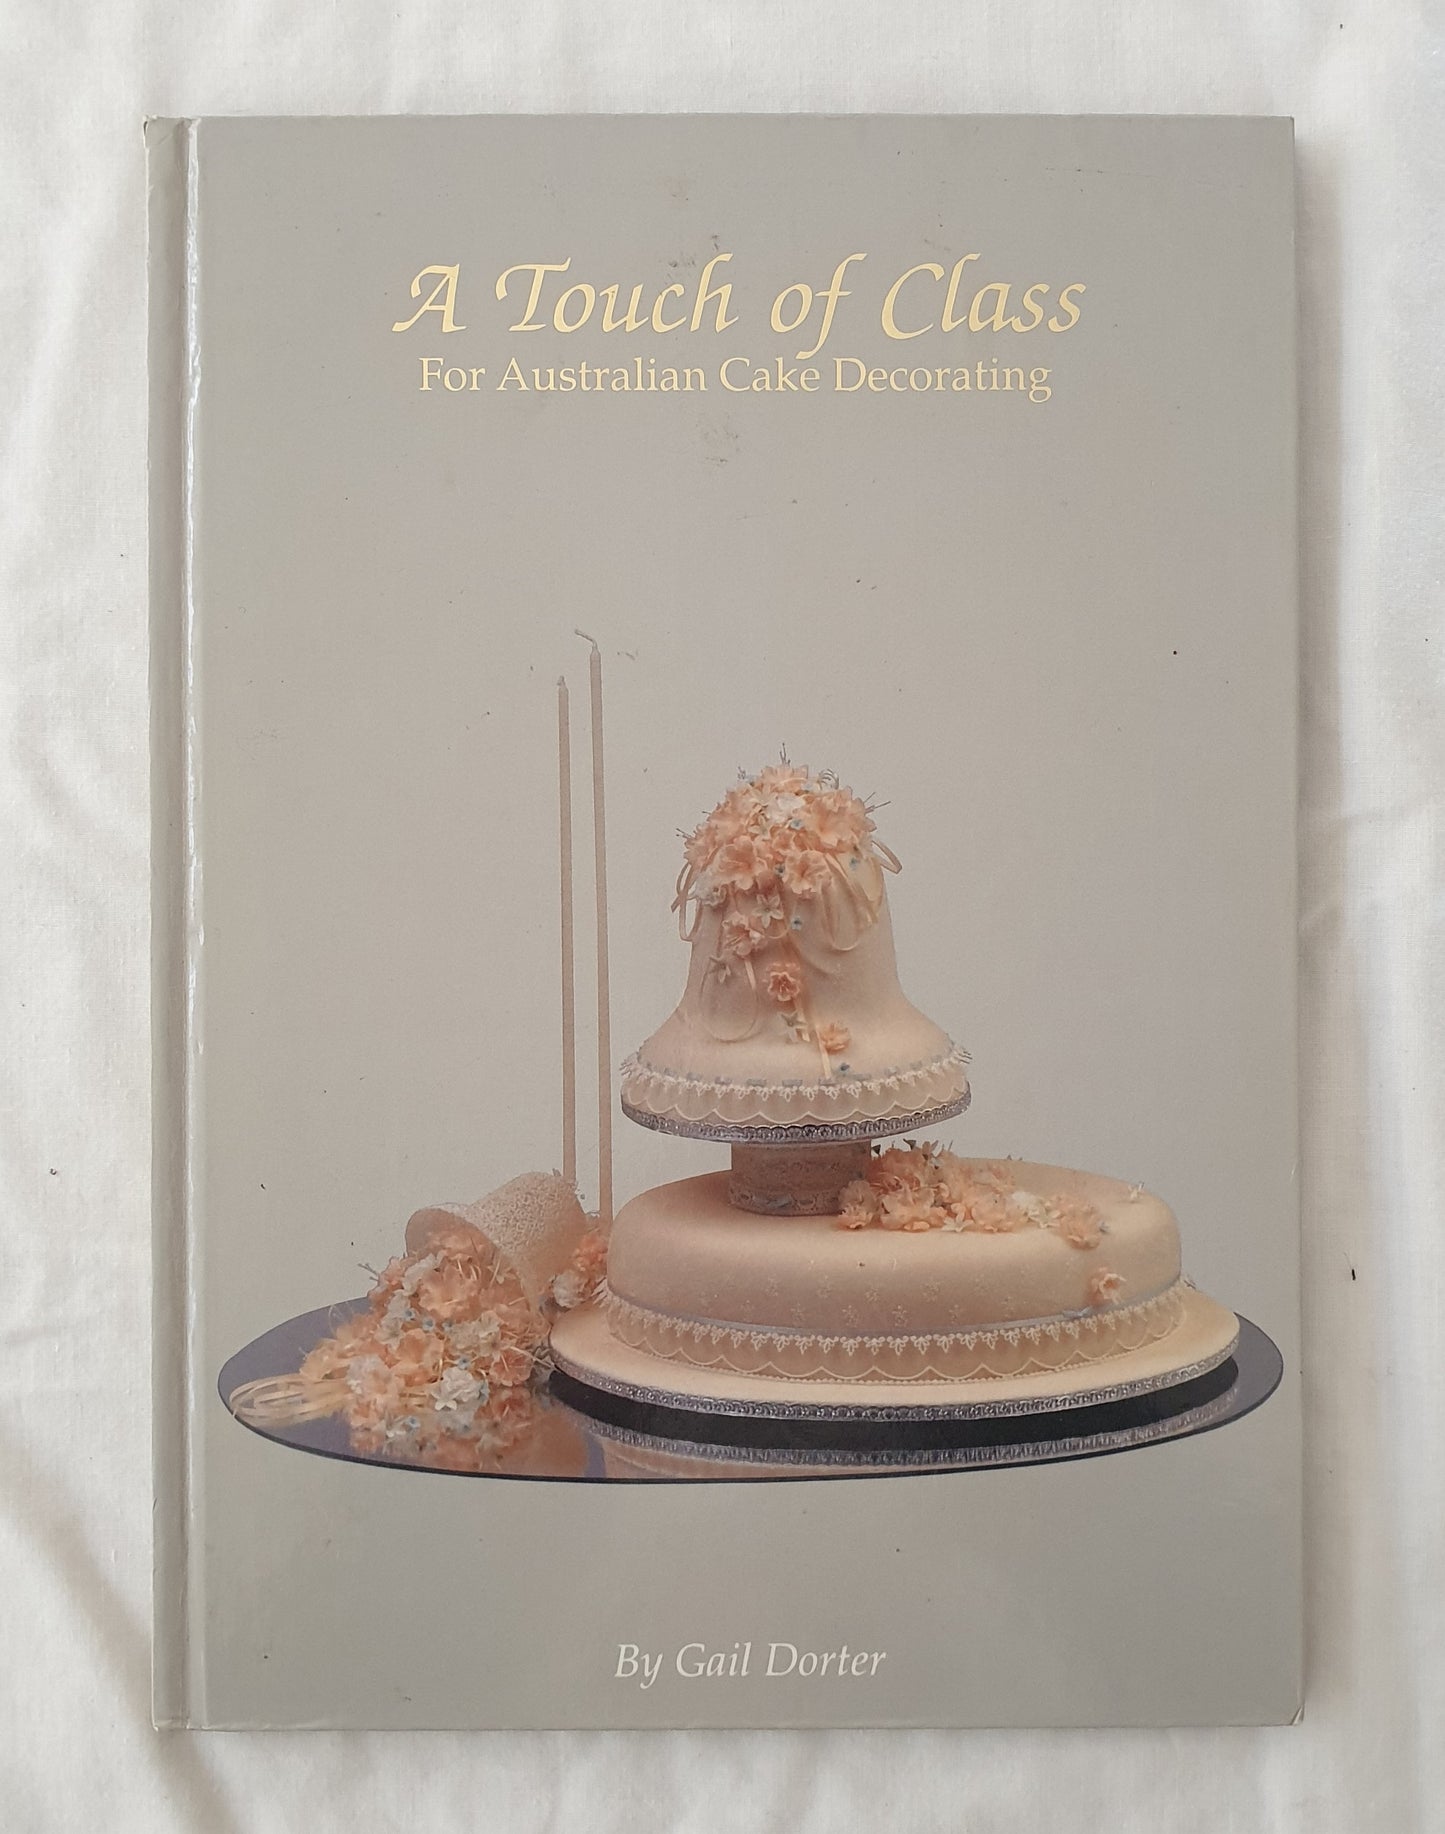 A Touch of Class  For Australian Cake Decorating  by Gail Dorter